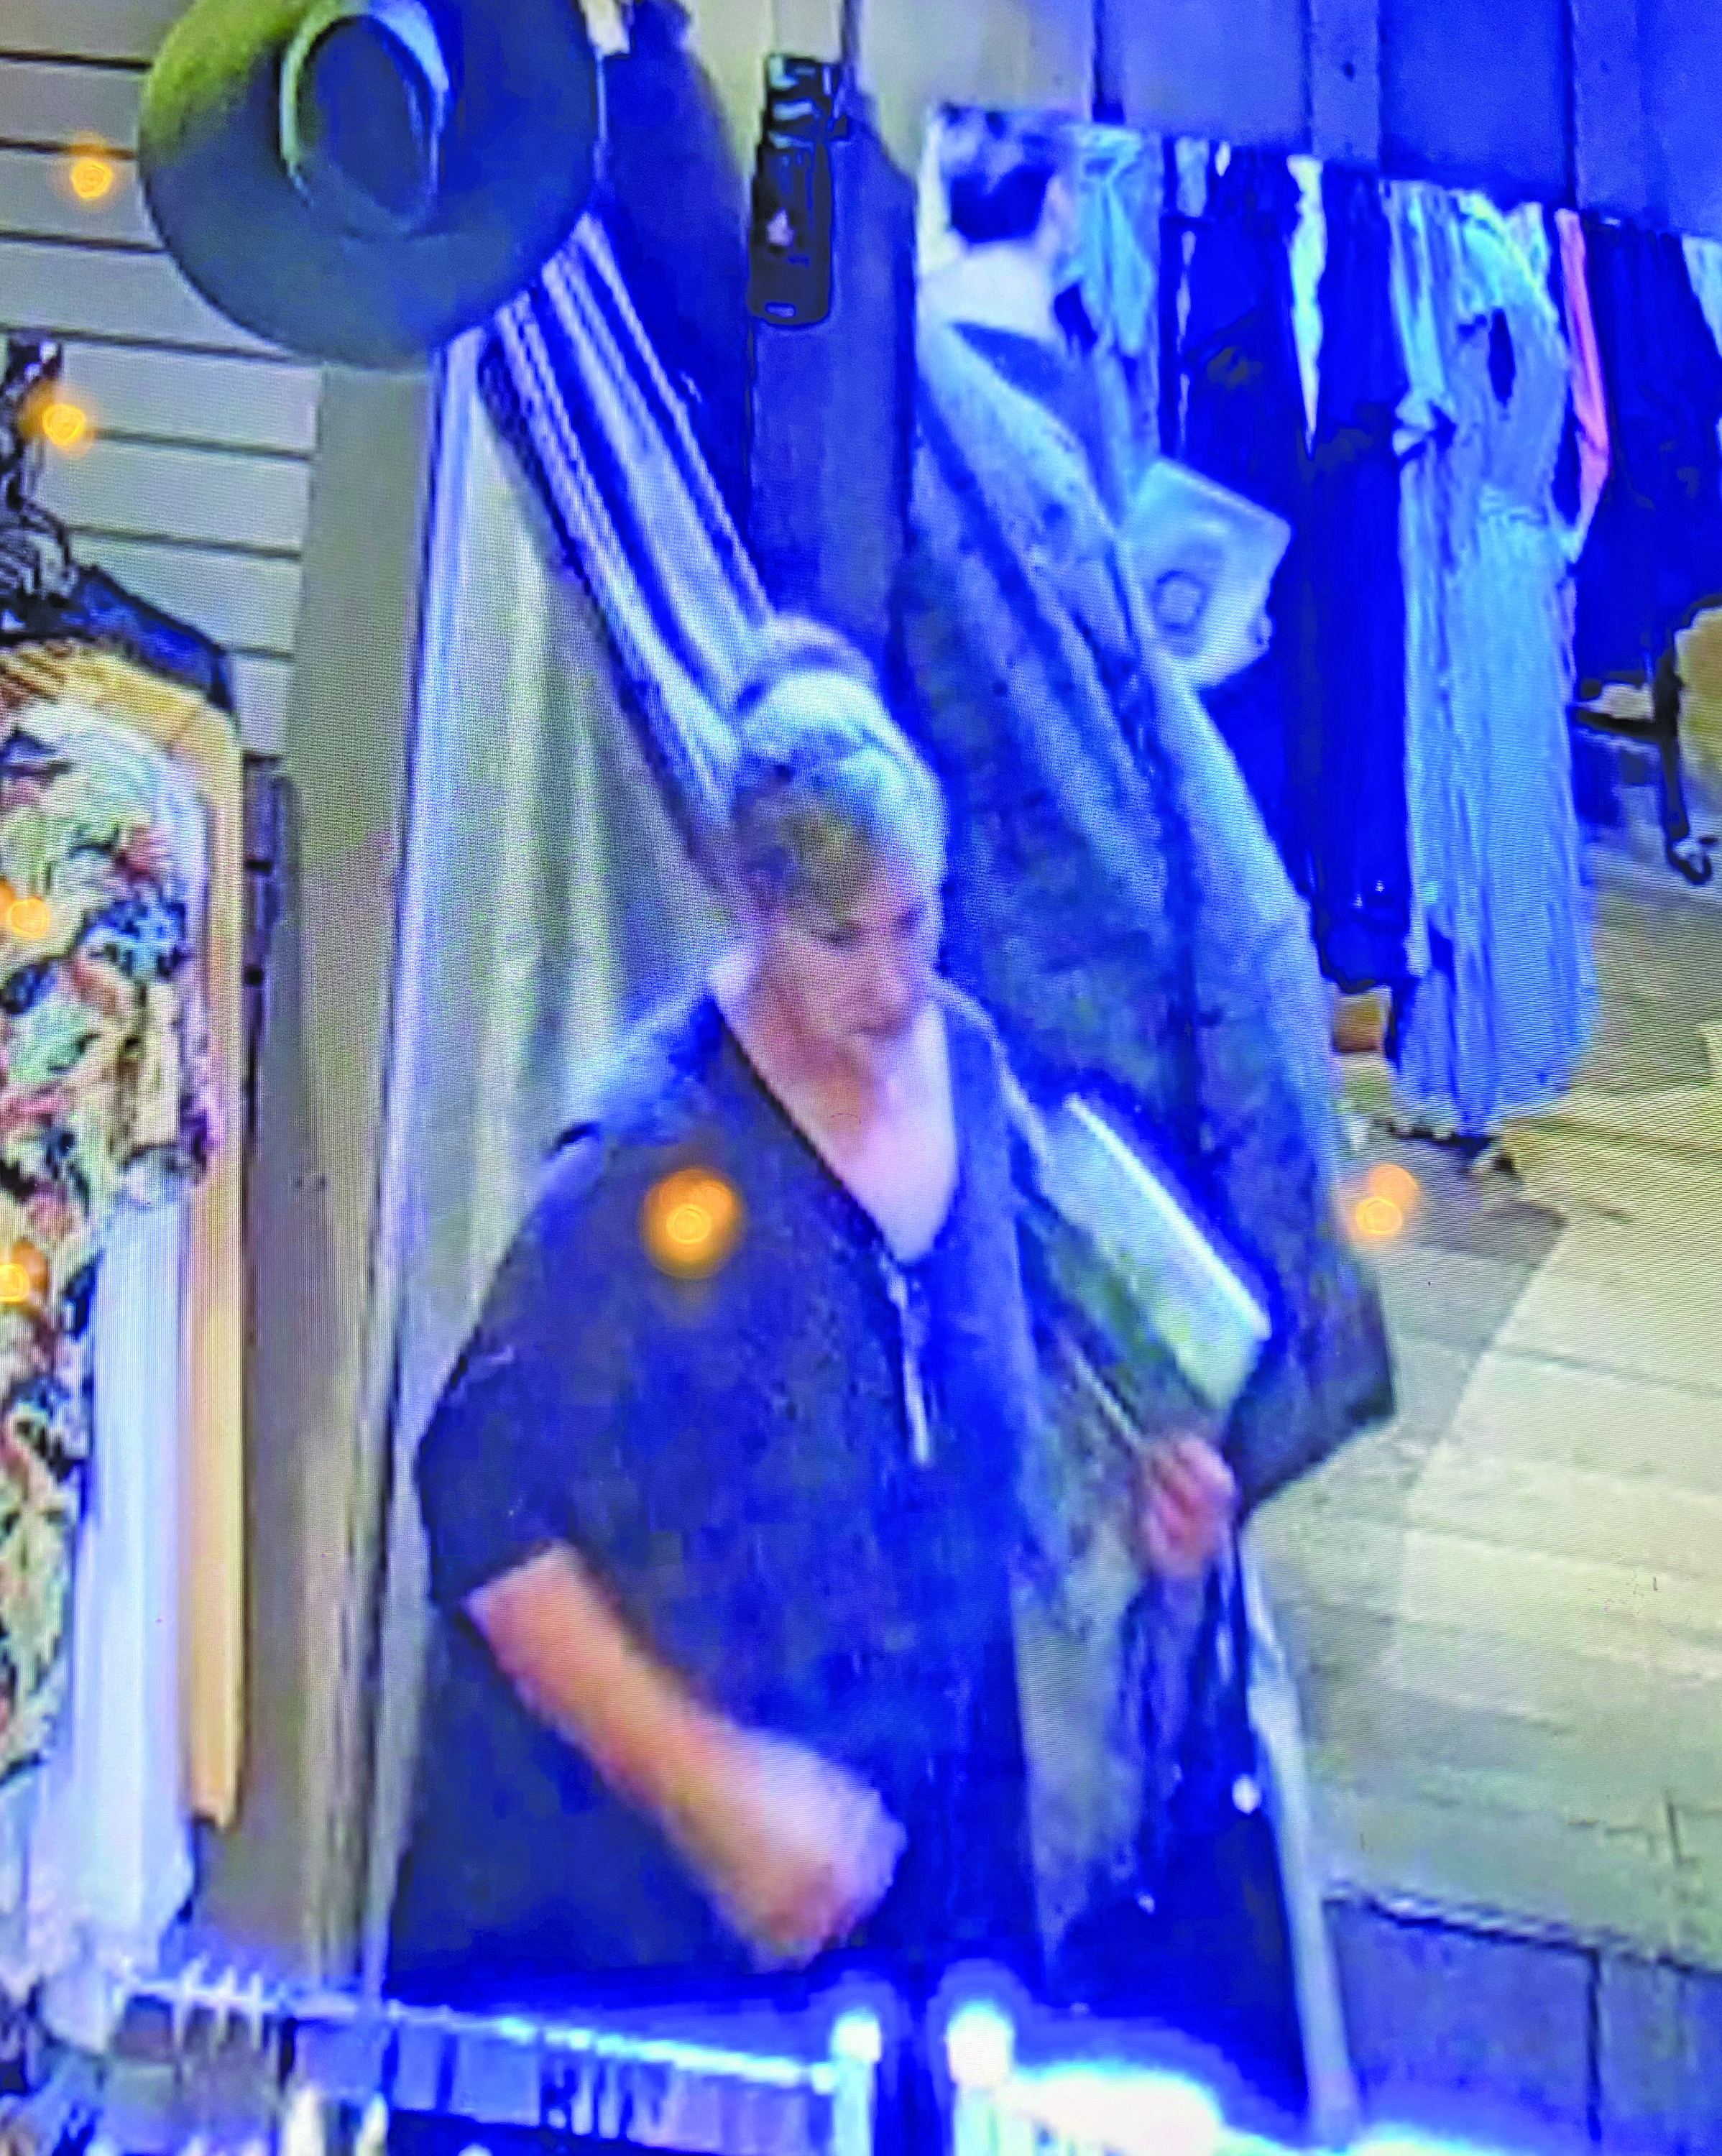 Submitted Photo The alleged shoplifter is a Caucasian woman thought to be between the ages of 45 and 55 years old.